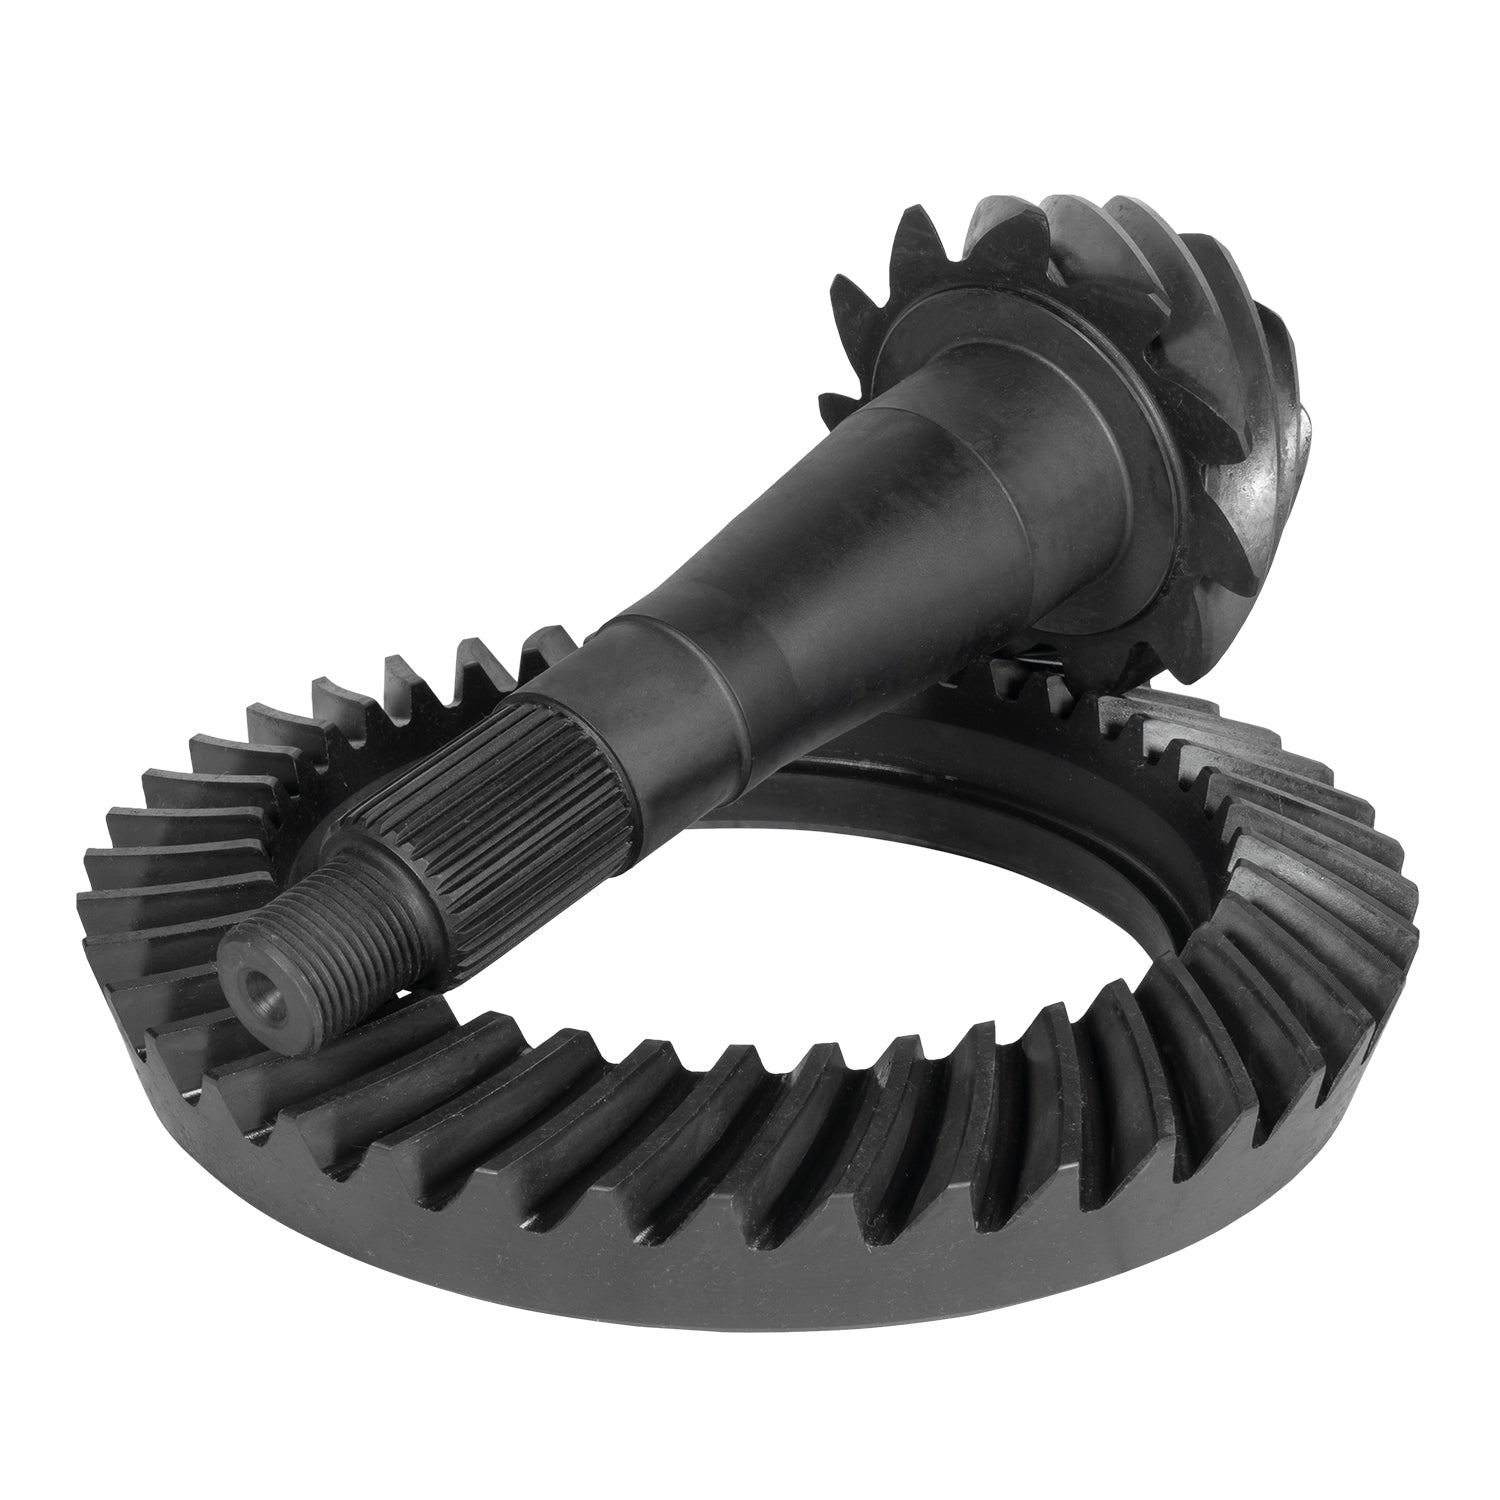 Yukon Gear Chrysler Dodge Plymouth Differential Ring and Pinion Kit - Rear YGK2341